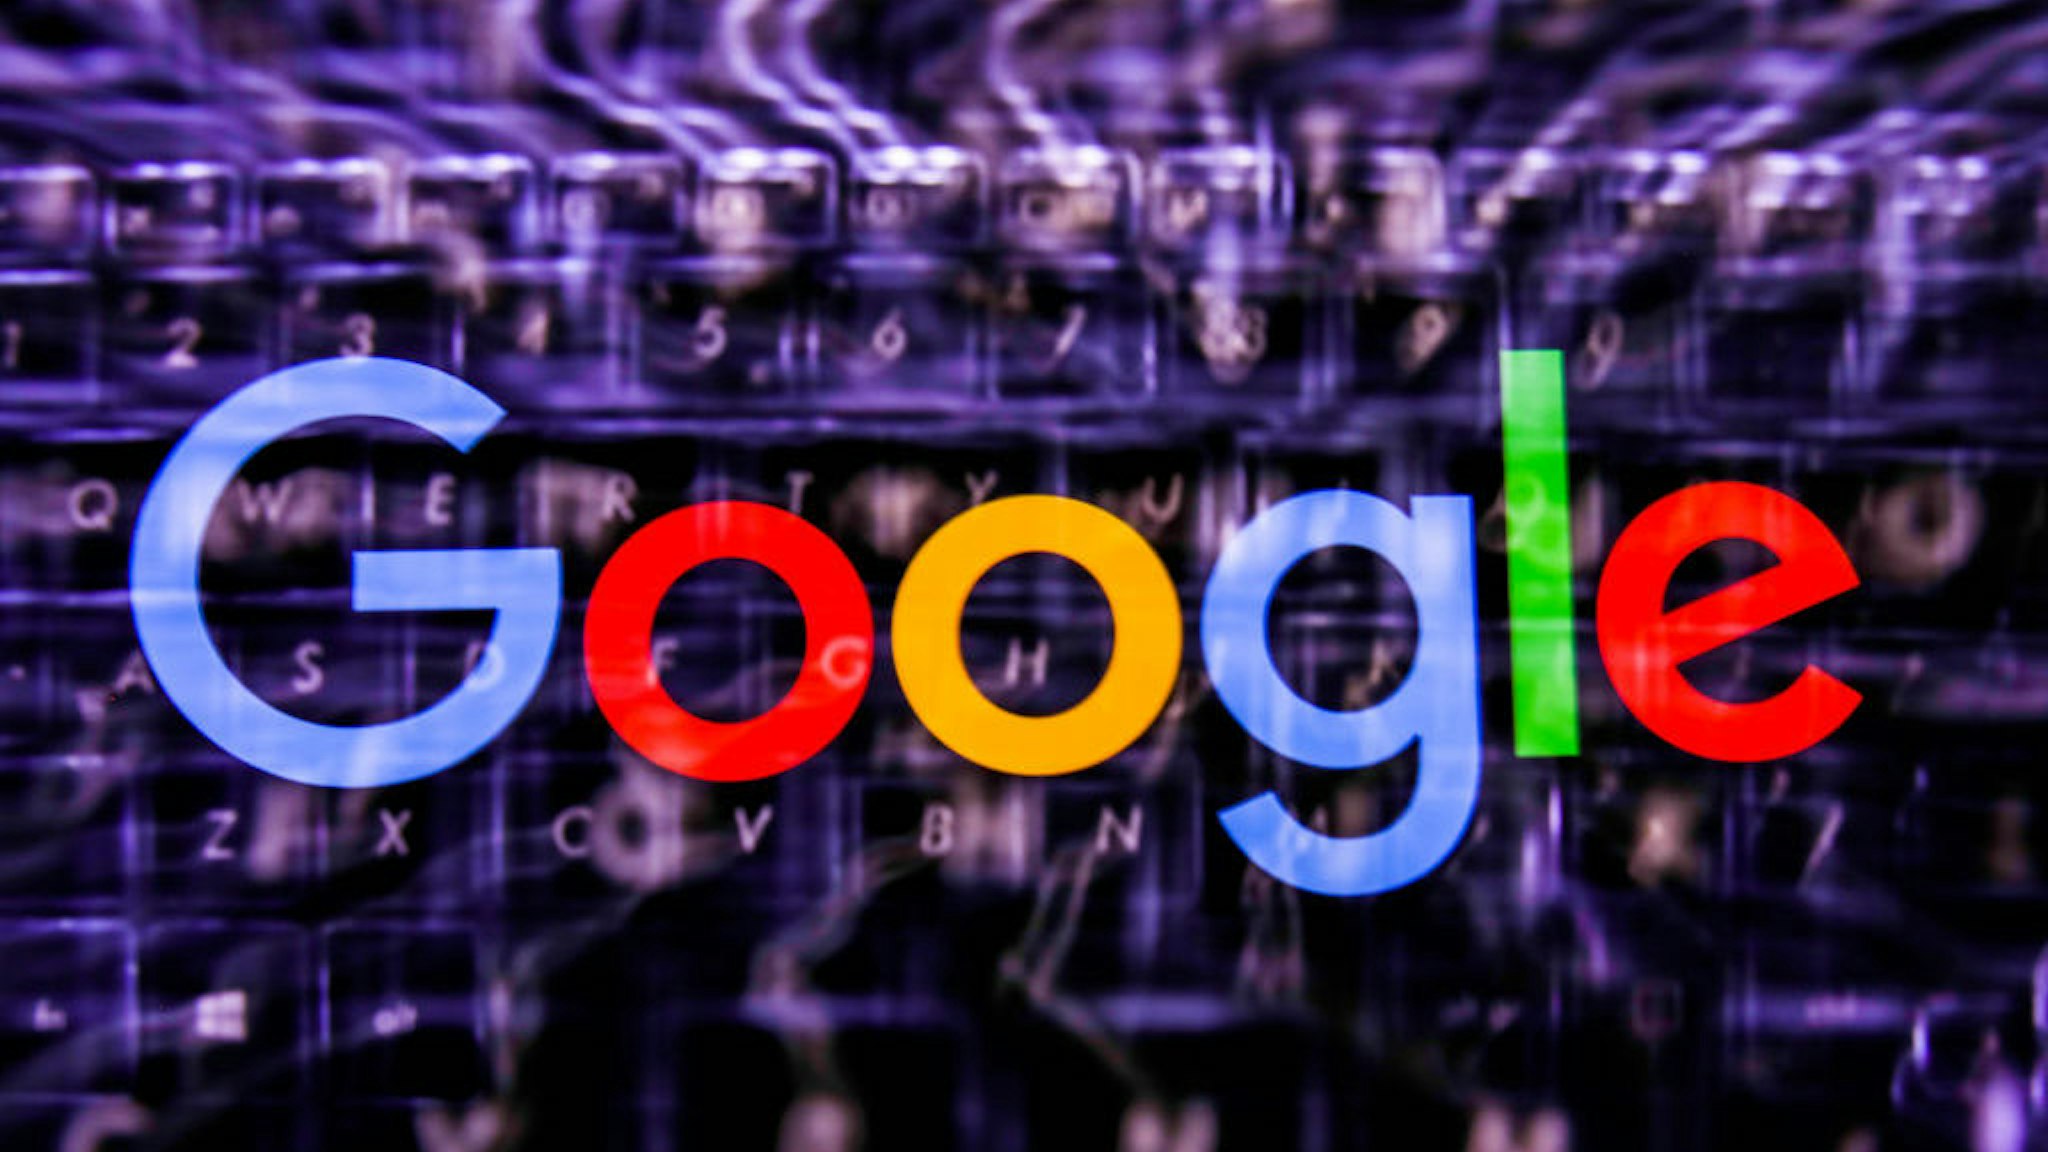 Google logo displayed on a phone screen and keyboard are seen in this multiple exposure illustration photo taken in Poland on June 14, 2020. European Commission officials said that Facebook, Twitter and Google should provide monthly fake news reports to prevent fake news about coronavirus pandemic. (Photo Illustration by Jakub Porzycki/NurPhoto via Getty Images)